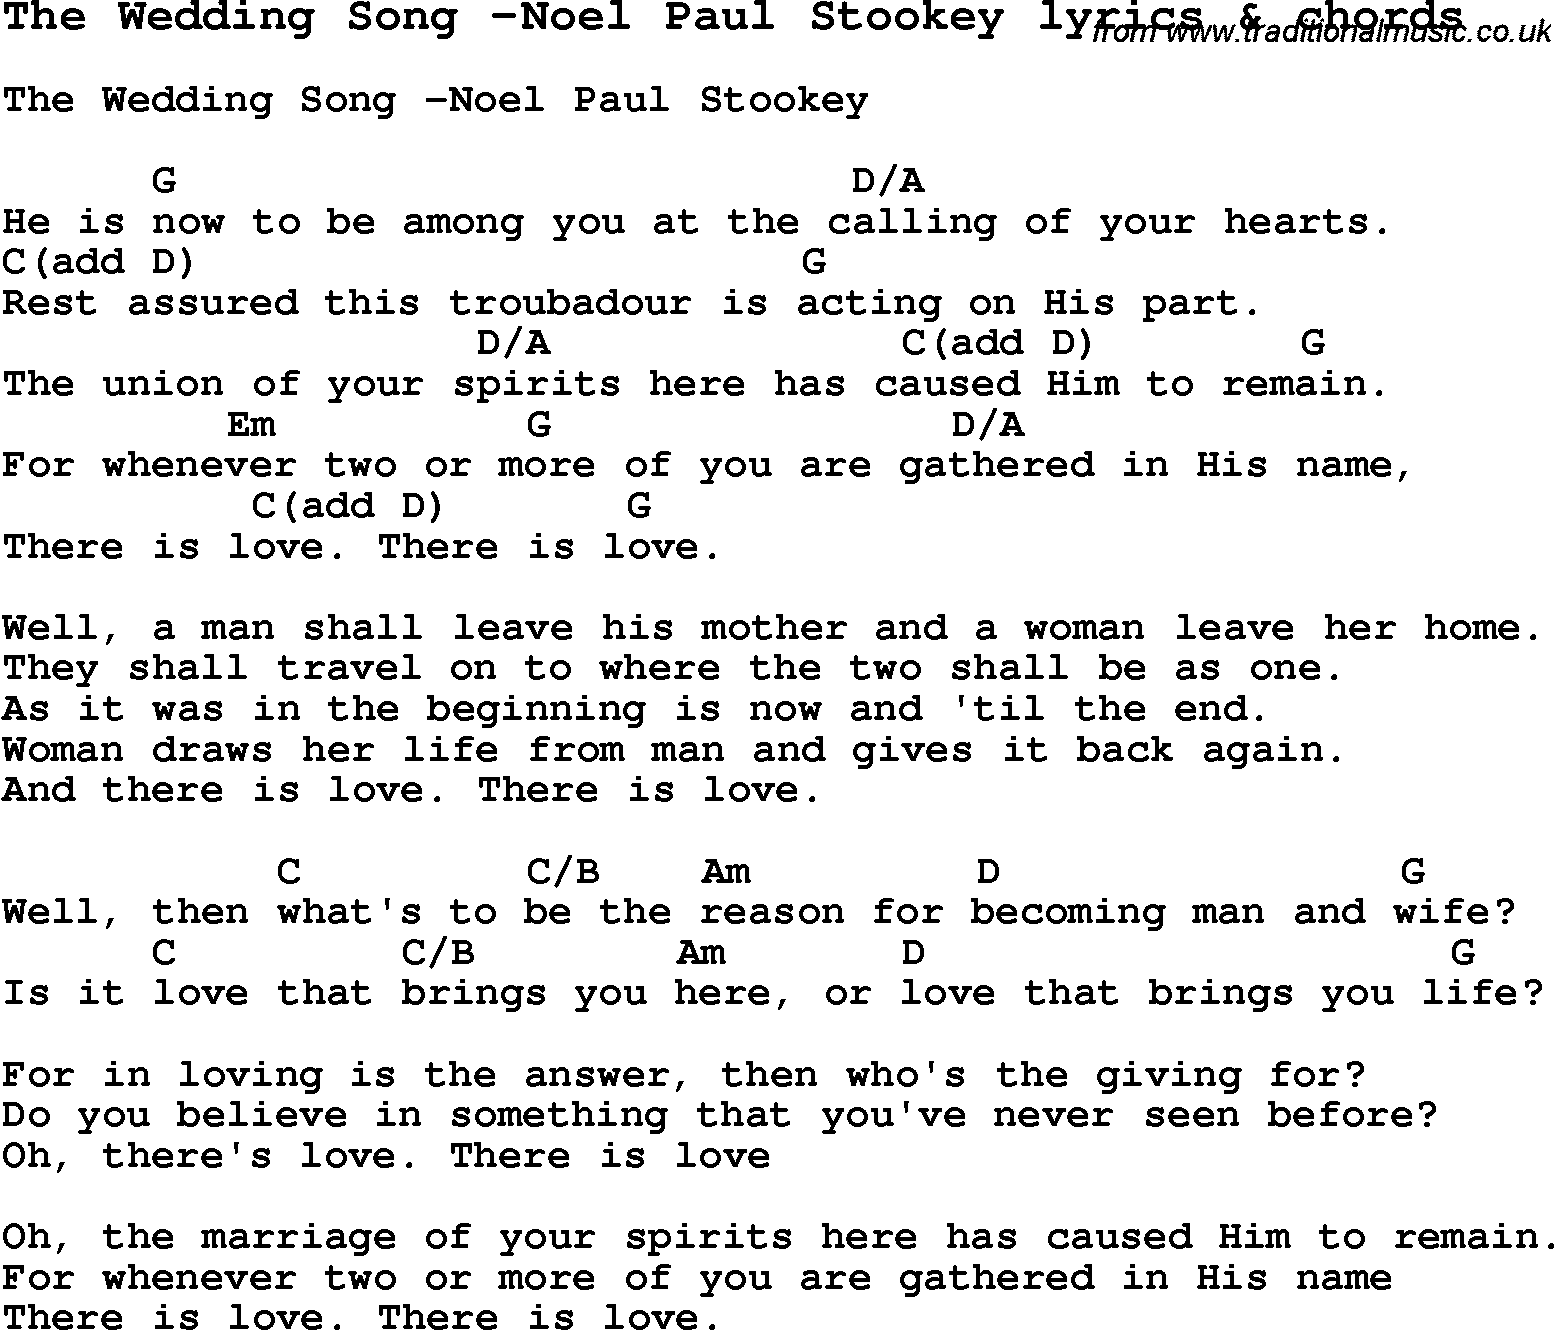 Love Song Lyrics for: The Wedding Song -Noel Paul Stookey with chords ...